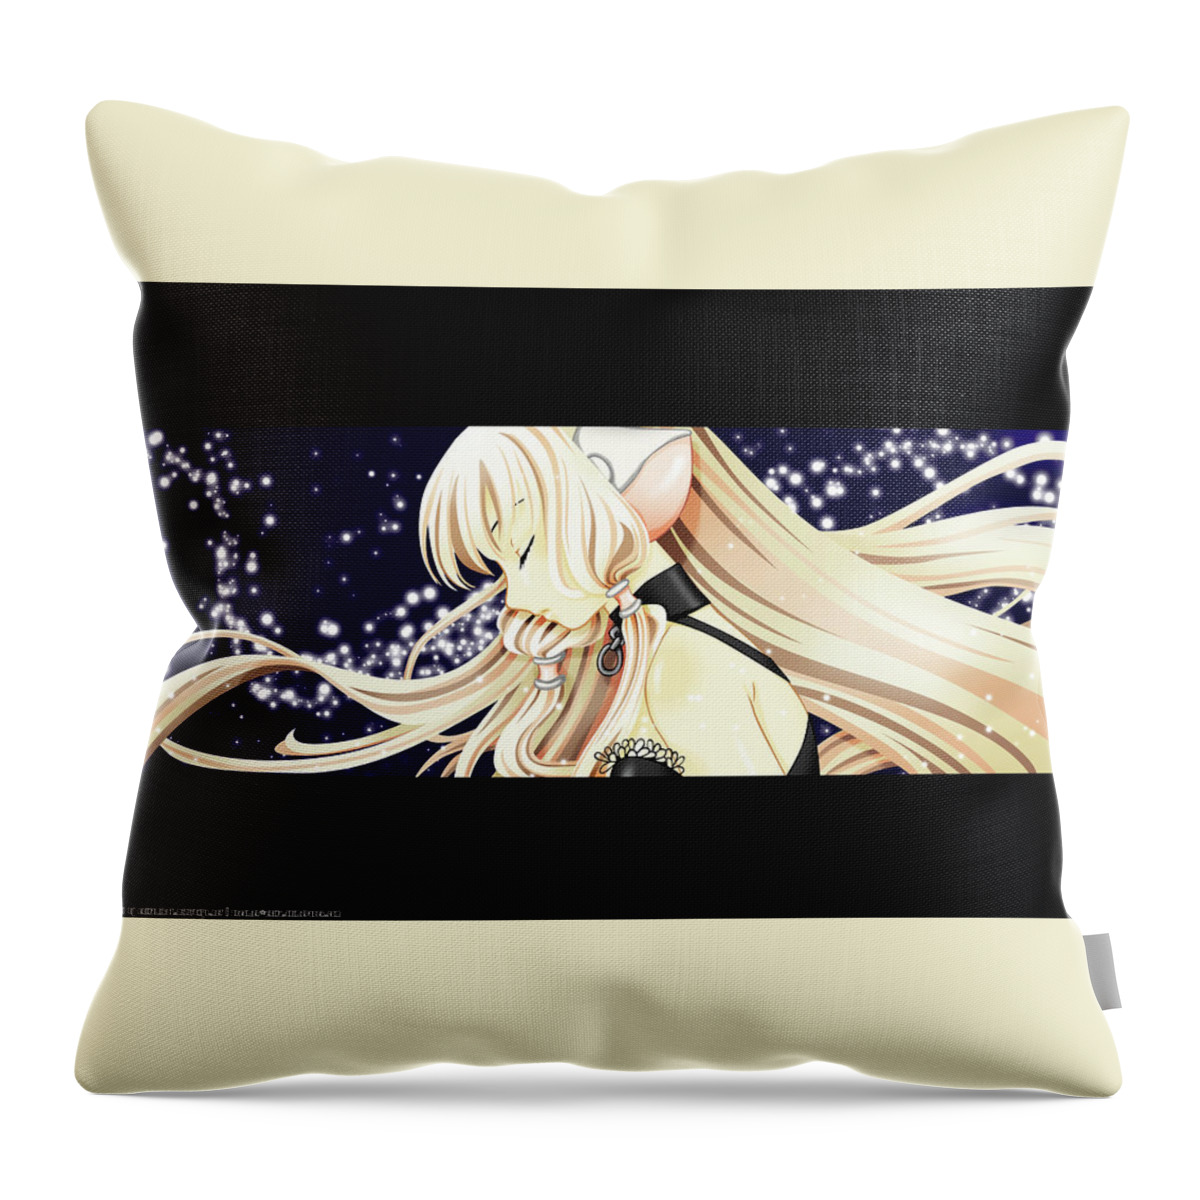 Chobits Throw Pillow featuring the digital art Chobits by Maye Loeser